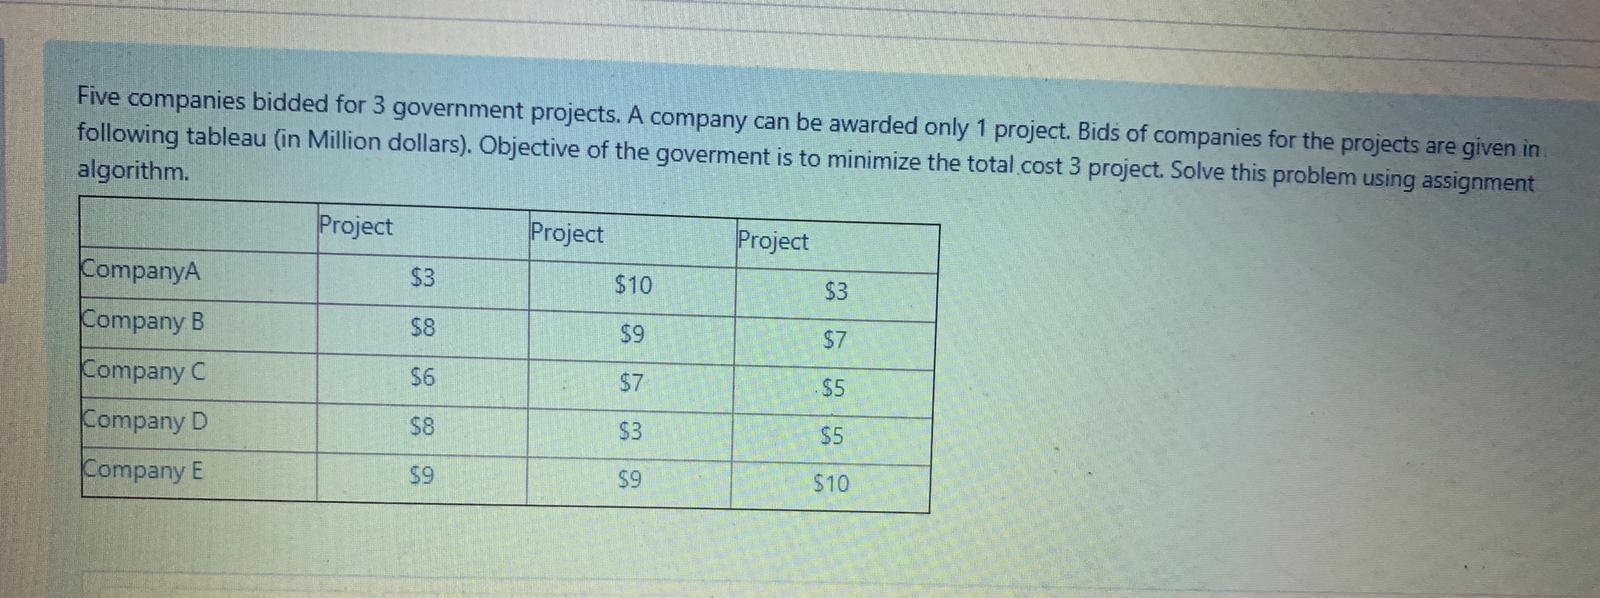 Five companies bidded for 3 government projects. A company can be awarded only 1 project. Bids of companies